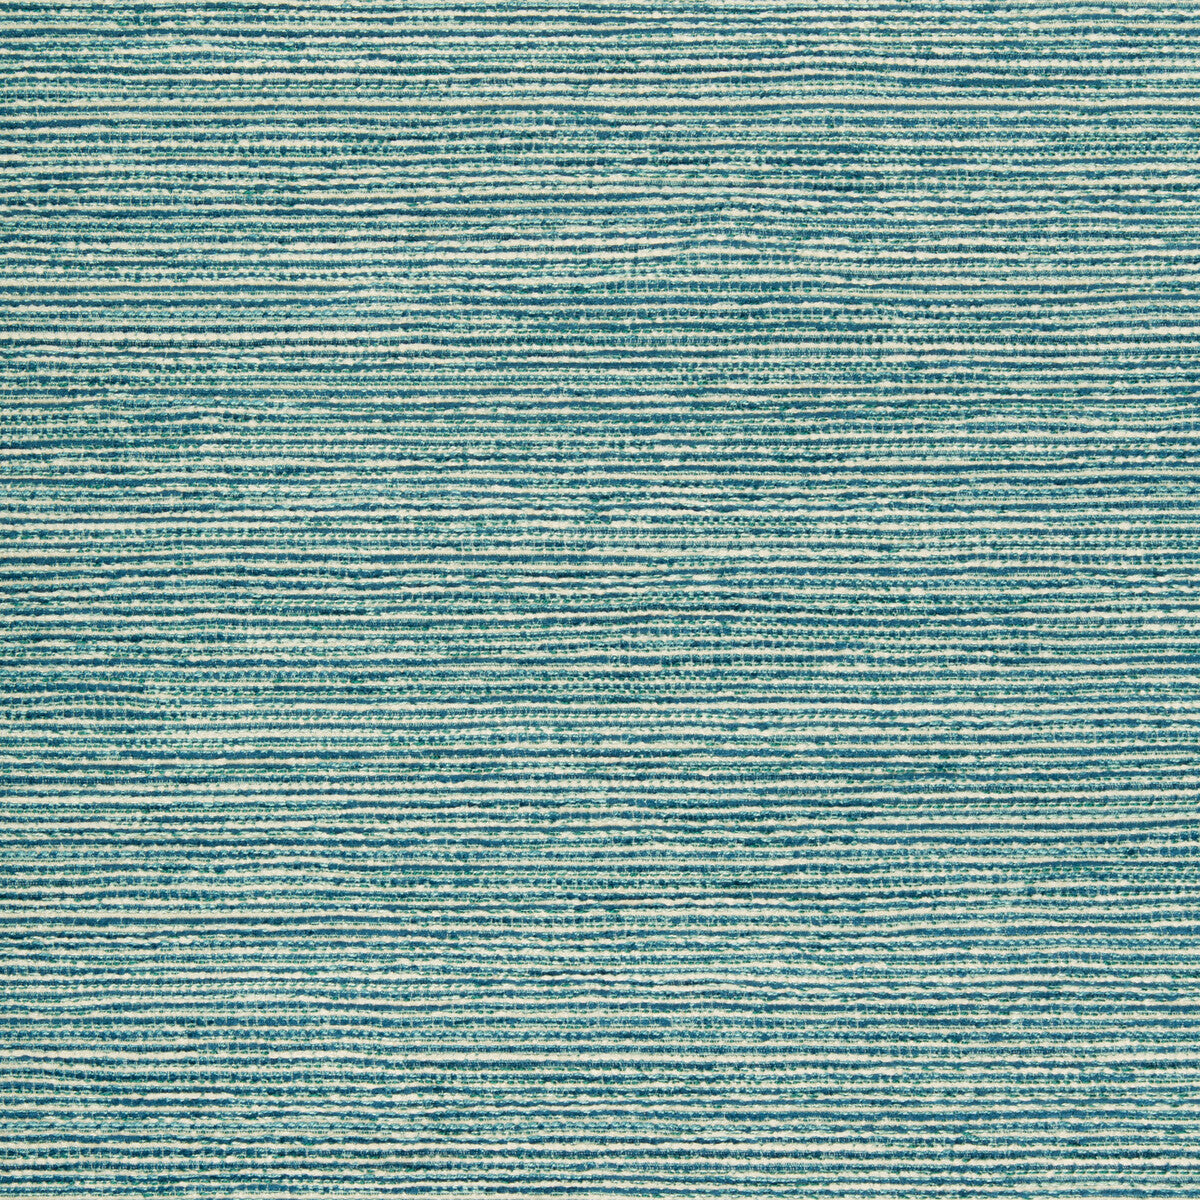 Kravet Contract fabric in 34734-513 color - pattern 34734.513.0 - by Kravet Contract in the Incase Crypton Gis collection